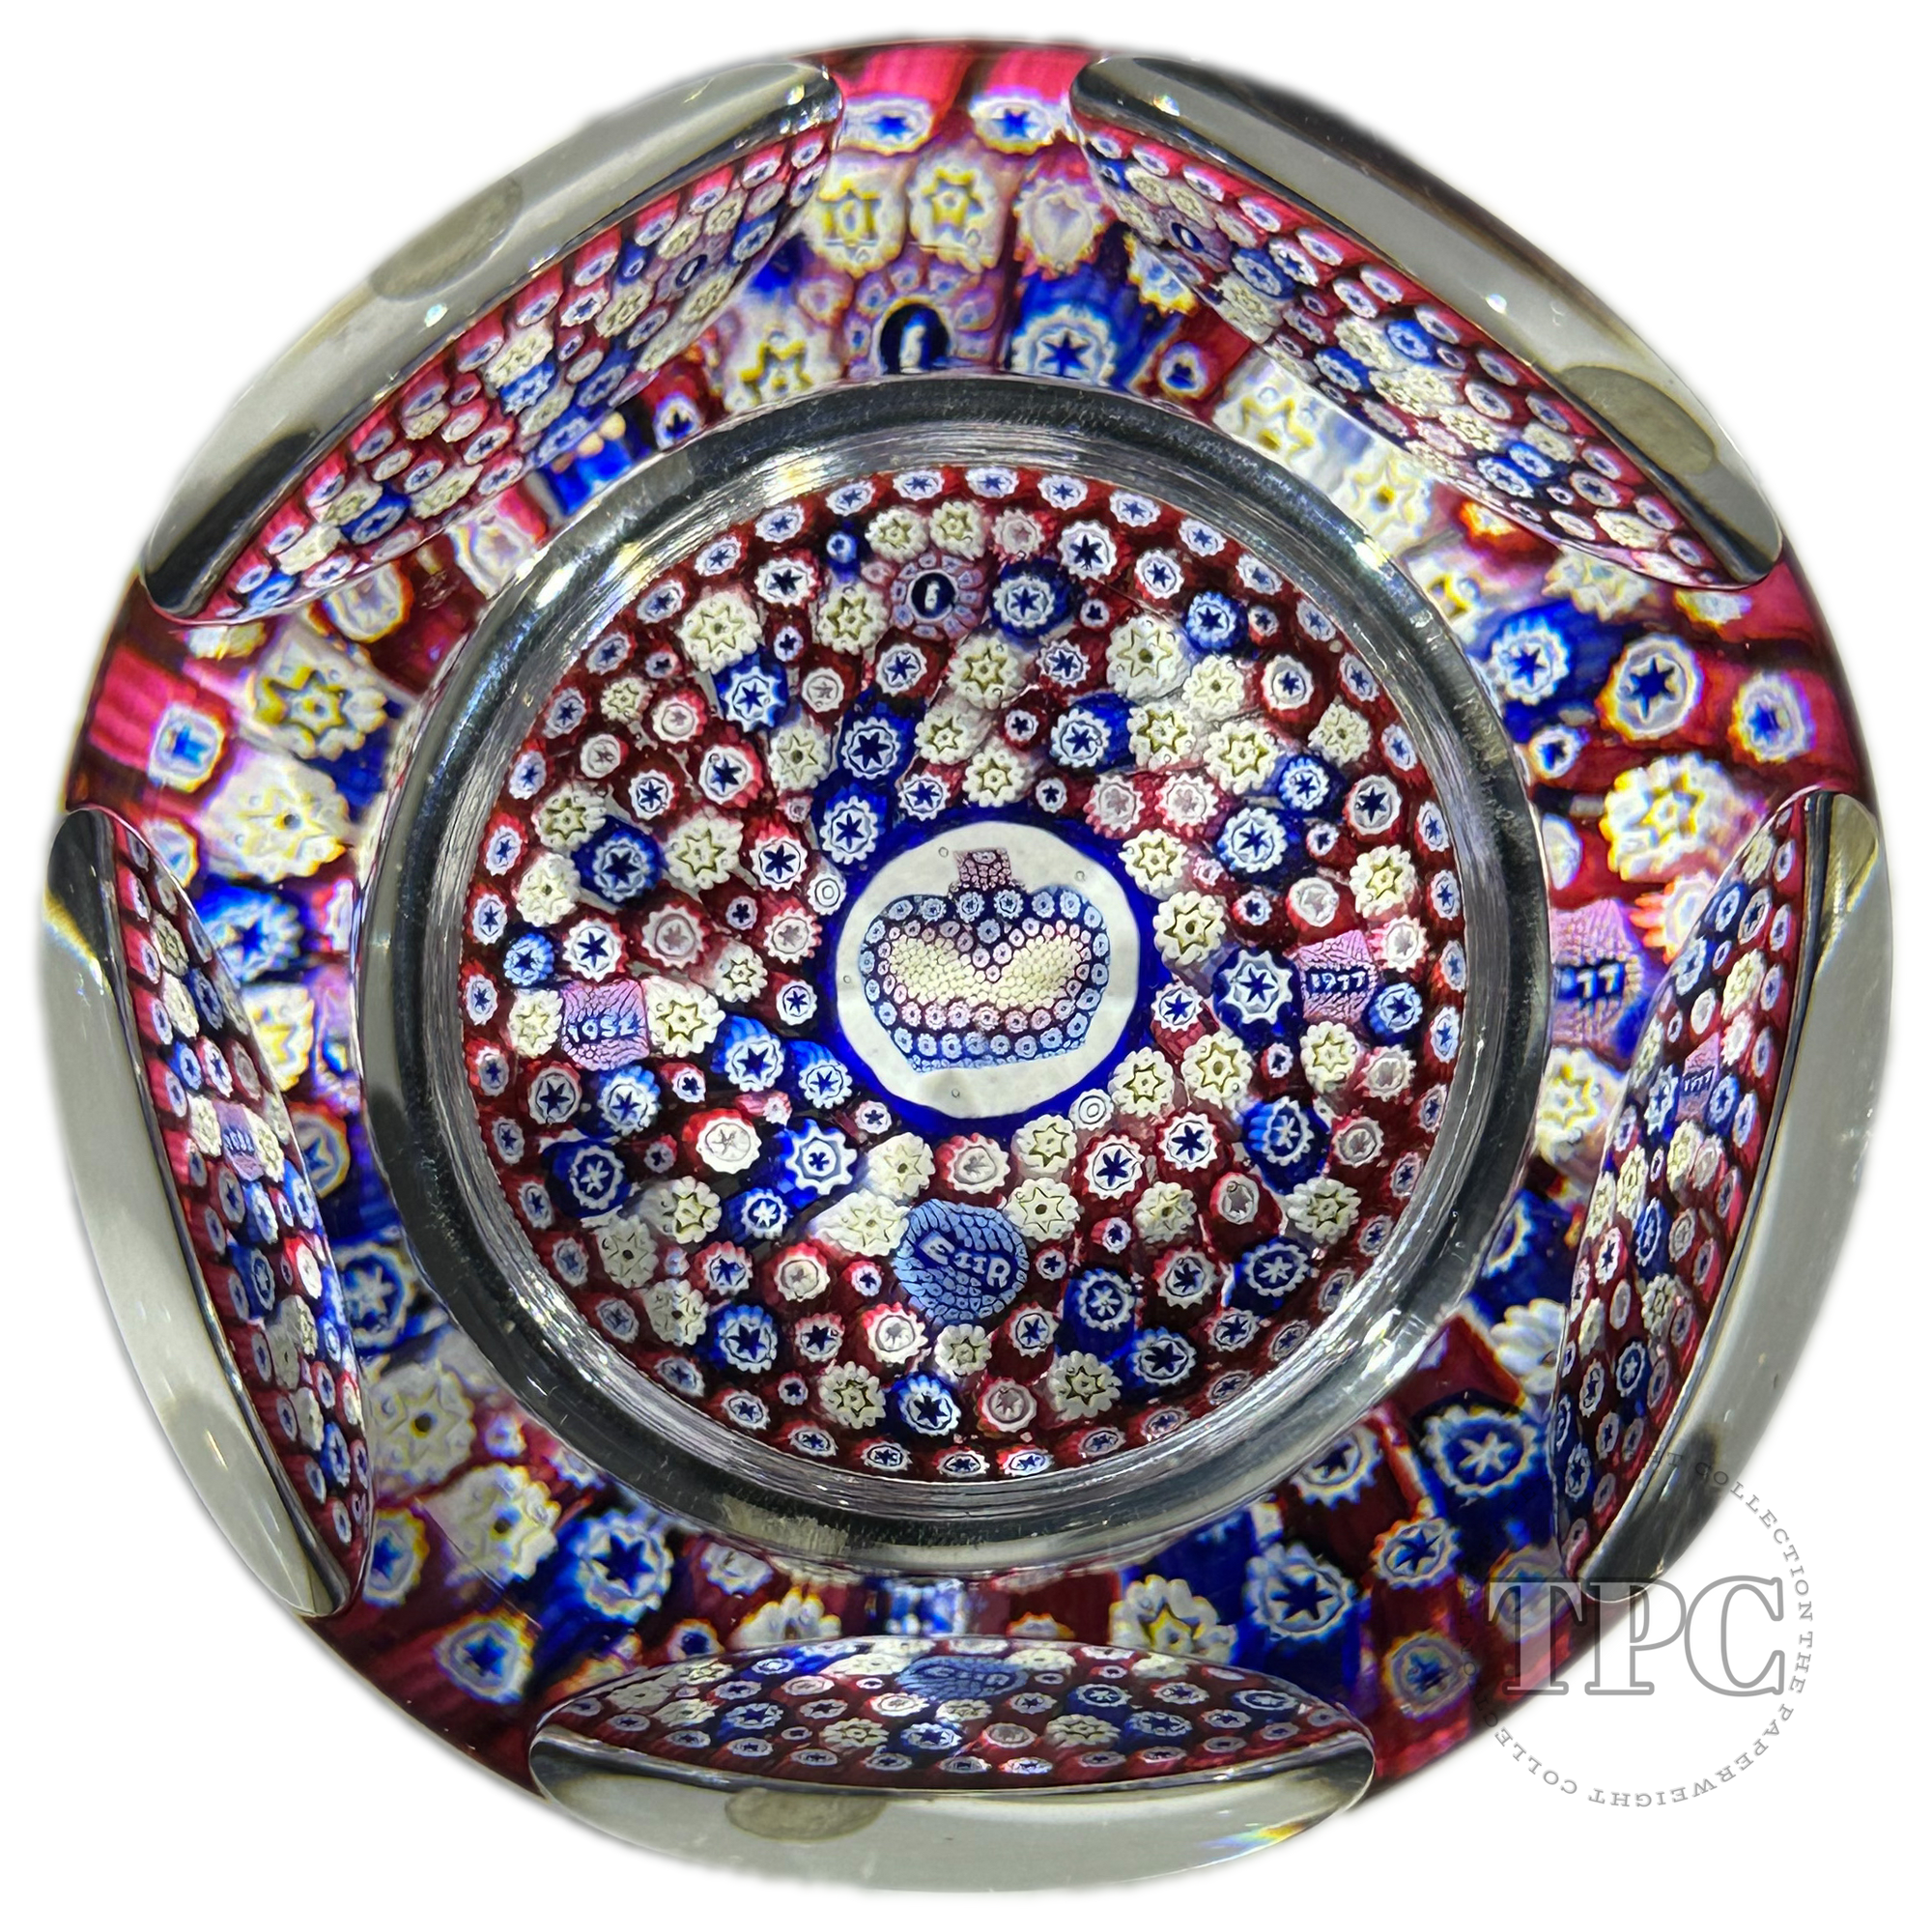 Whitefriars 1977 Glass Art Paperweight Queen's Silver Jubilee Colorful Clospack Millefiori with Crown Murrine